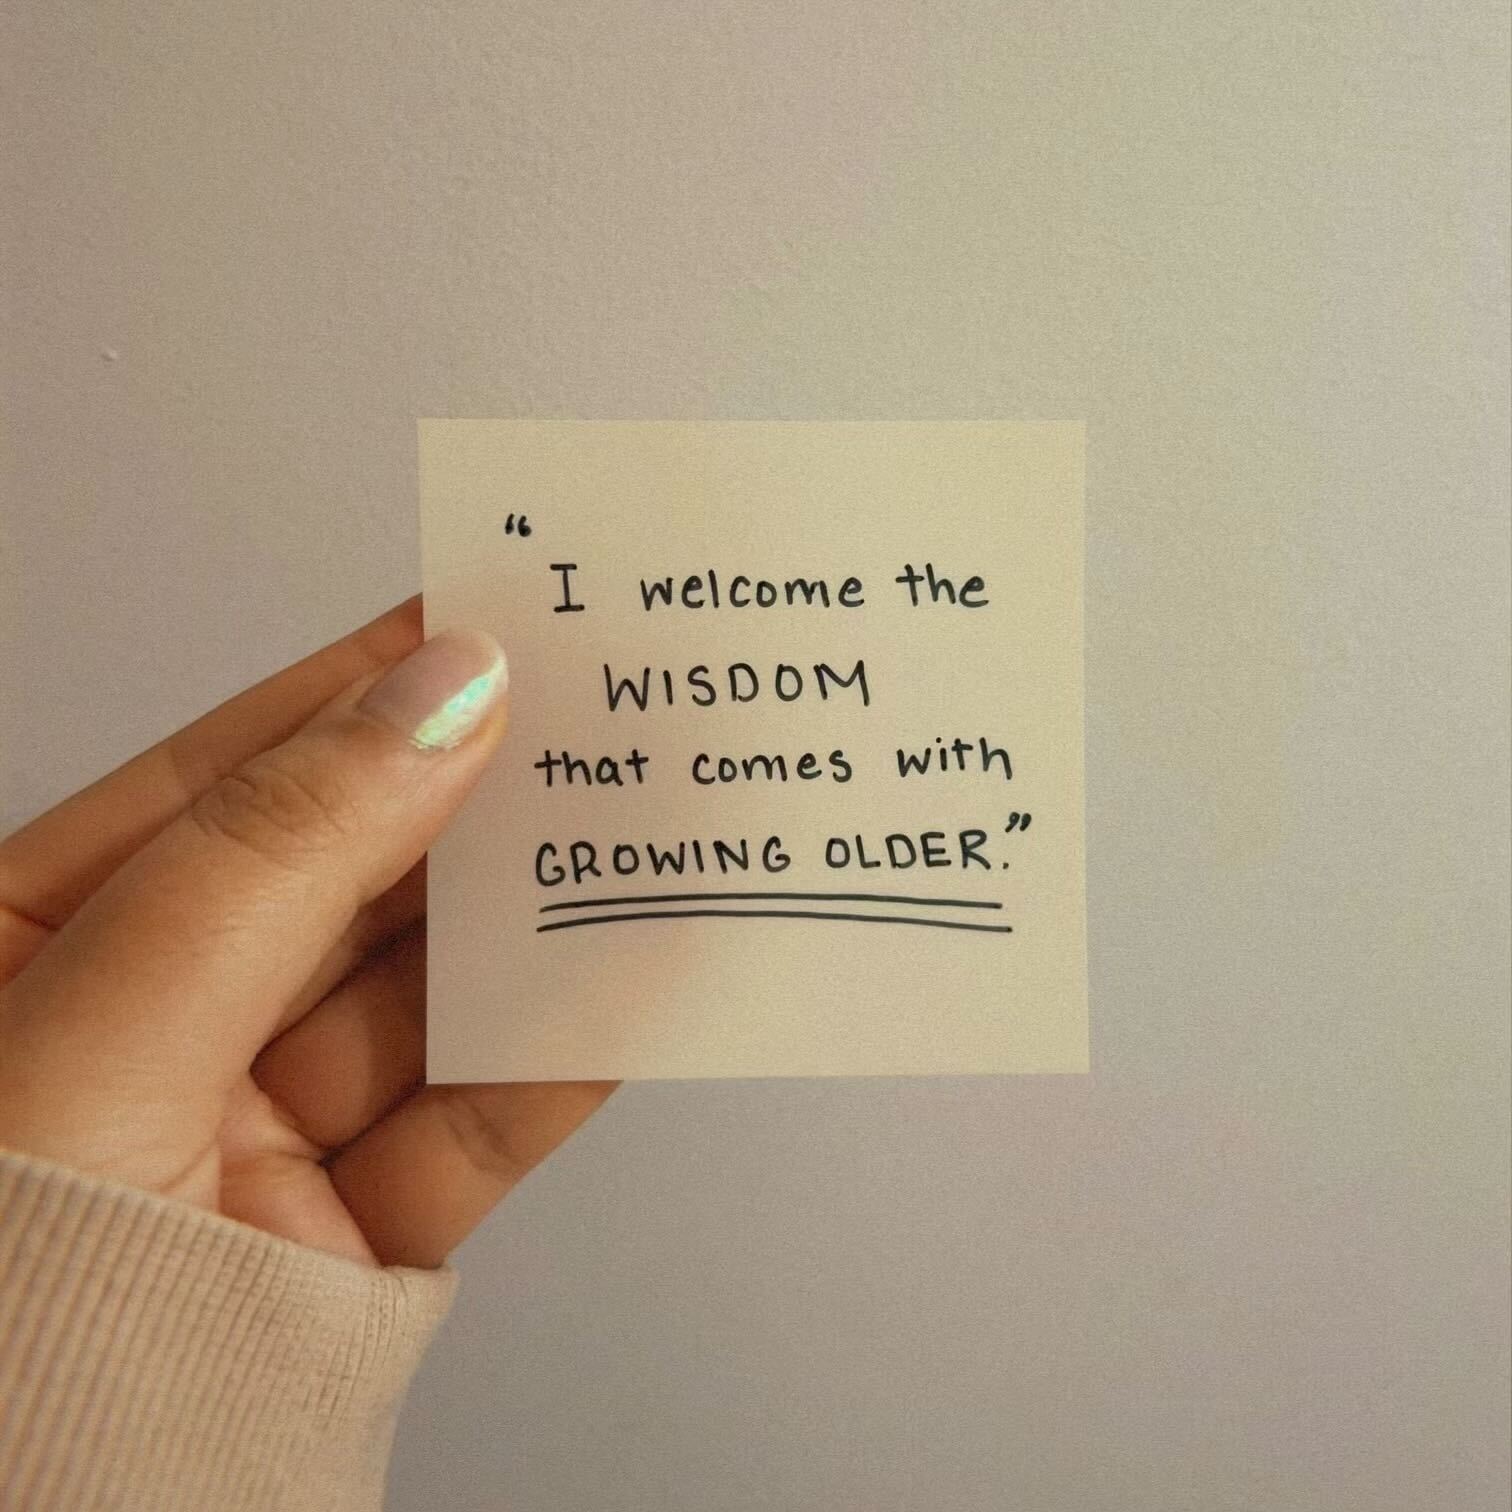 A sticky note held up, reading "I welcome the wisdom that comes with growing older".